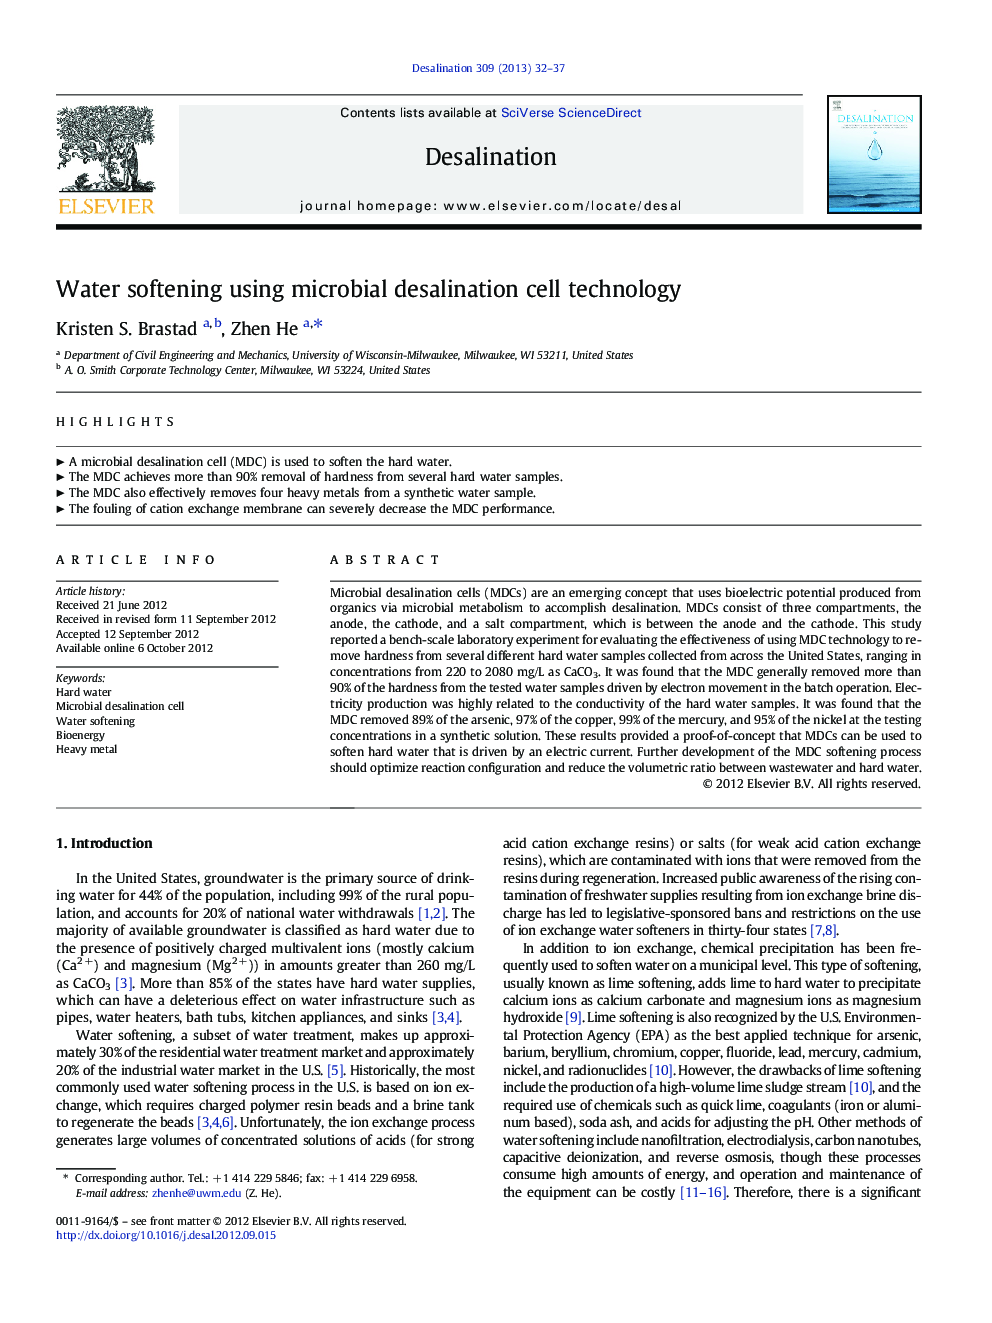 Water softening using microbial desalination cell technology